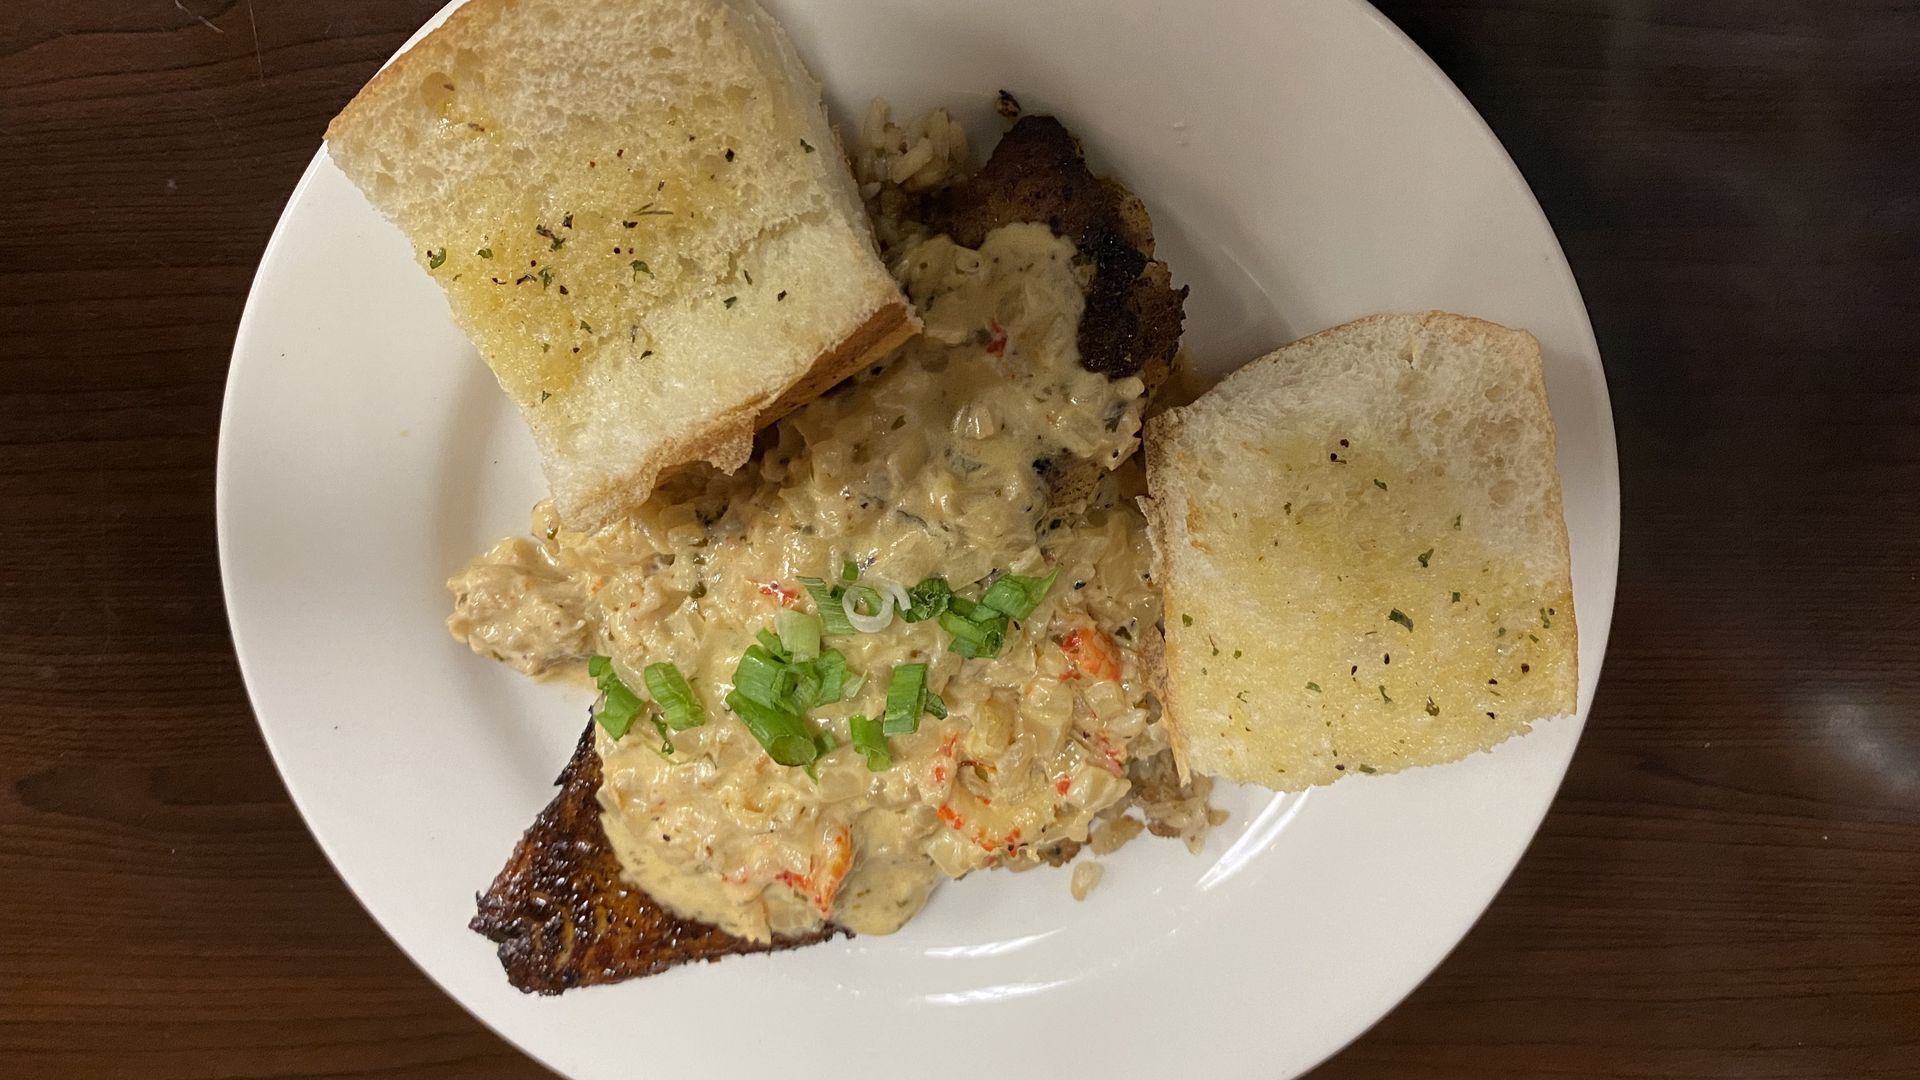 Blackened red snapper covered in a white win and rice sauce on a plate with two pieces of garlic bread